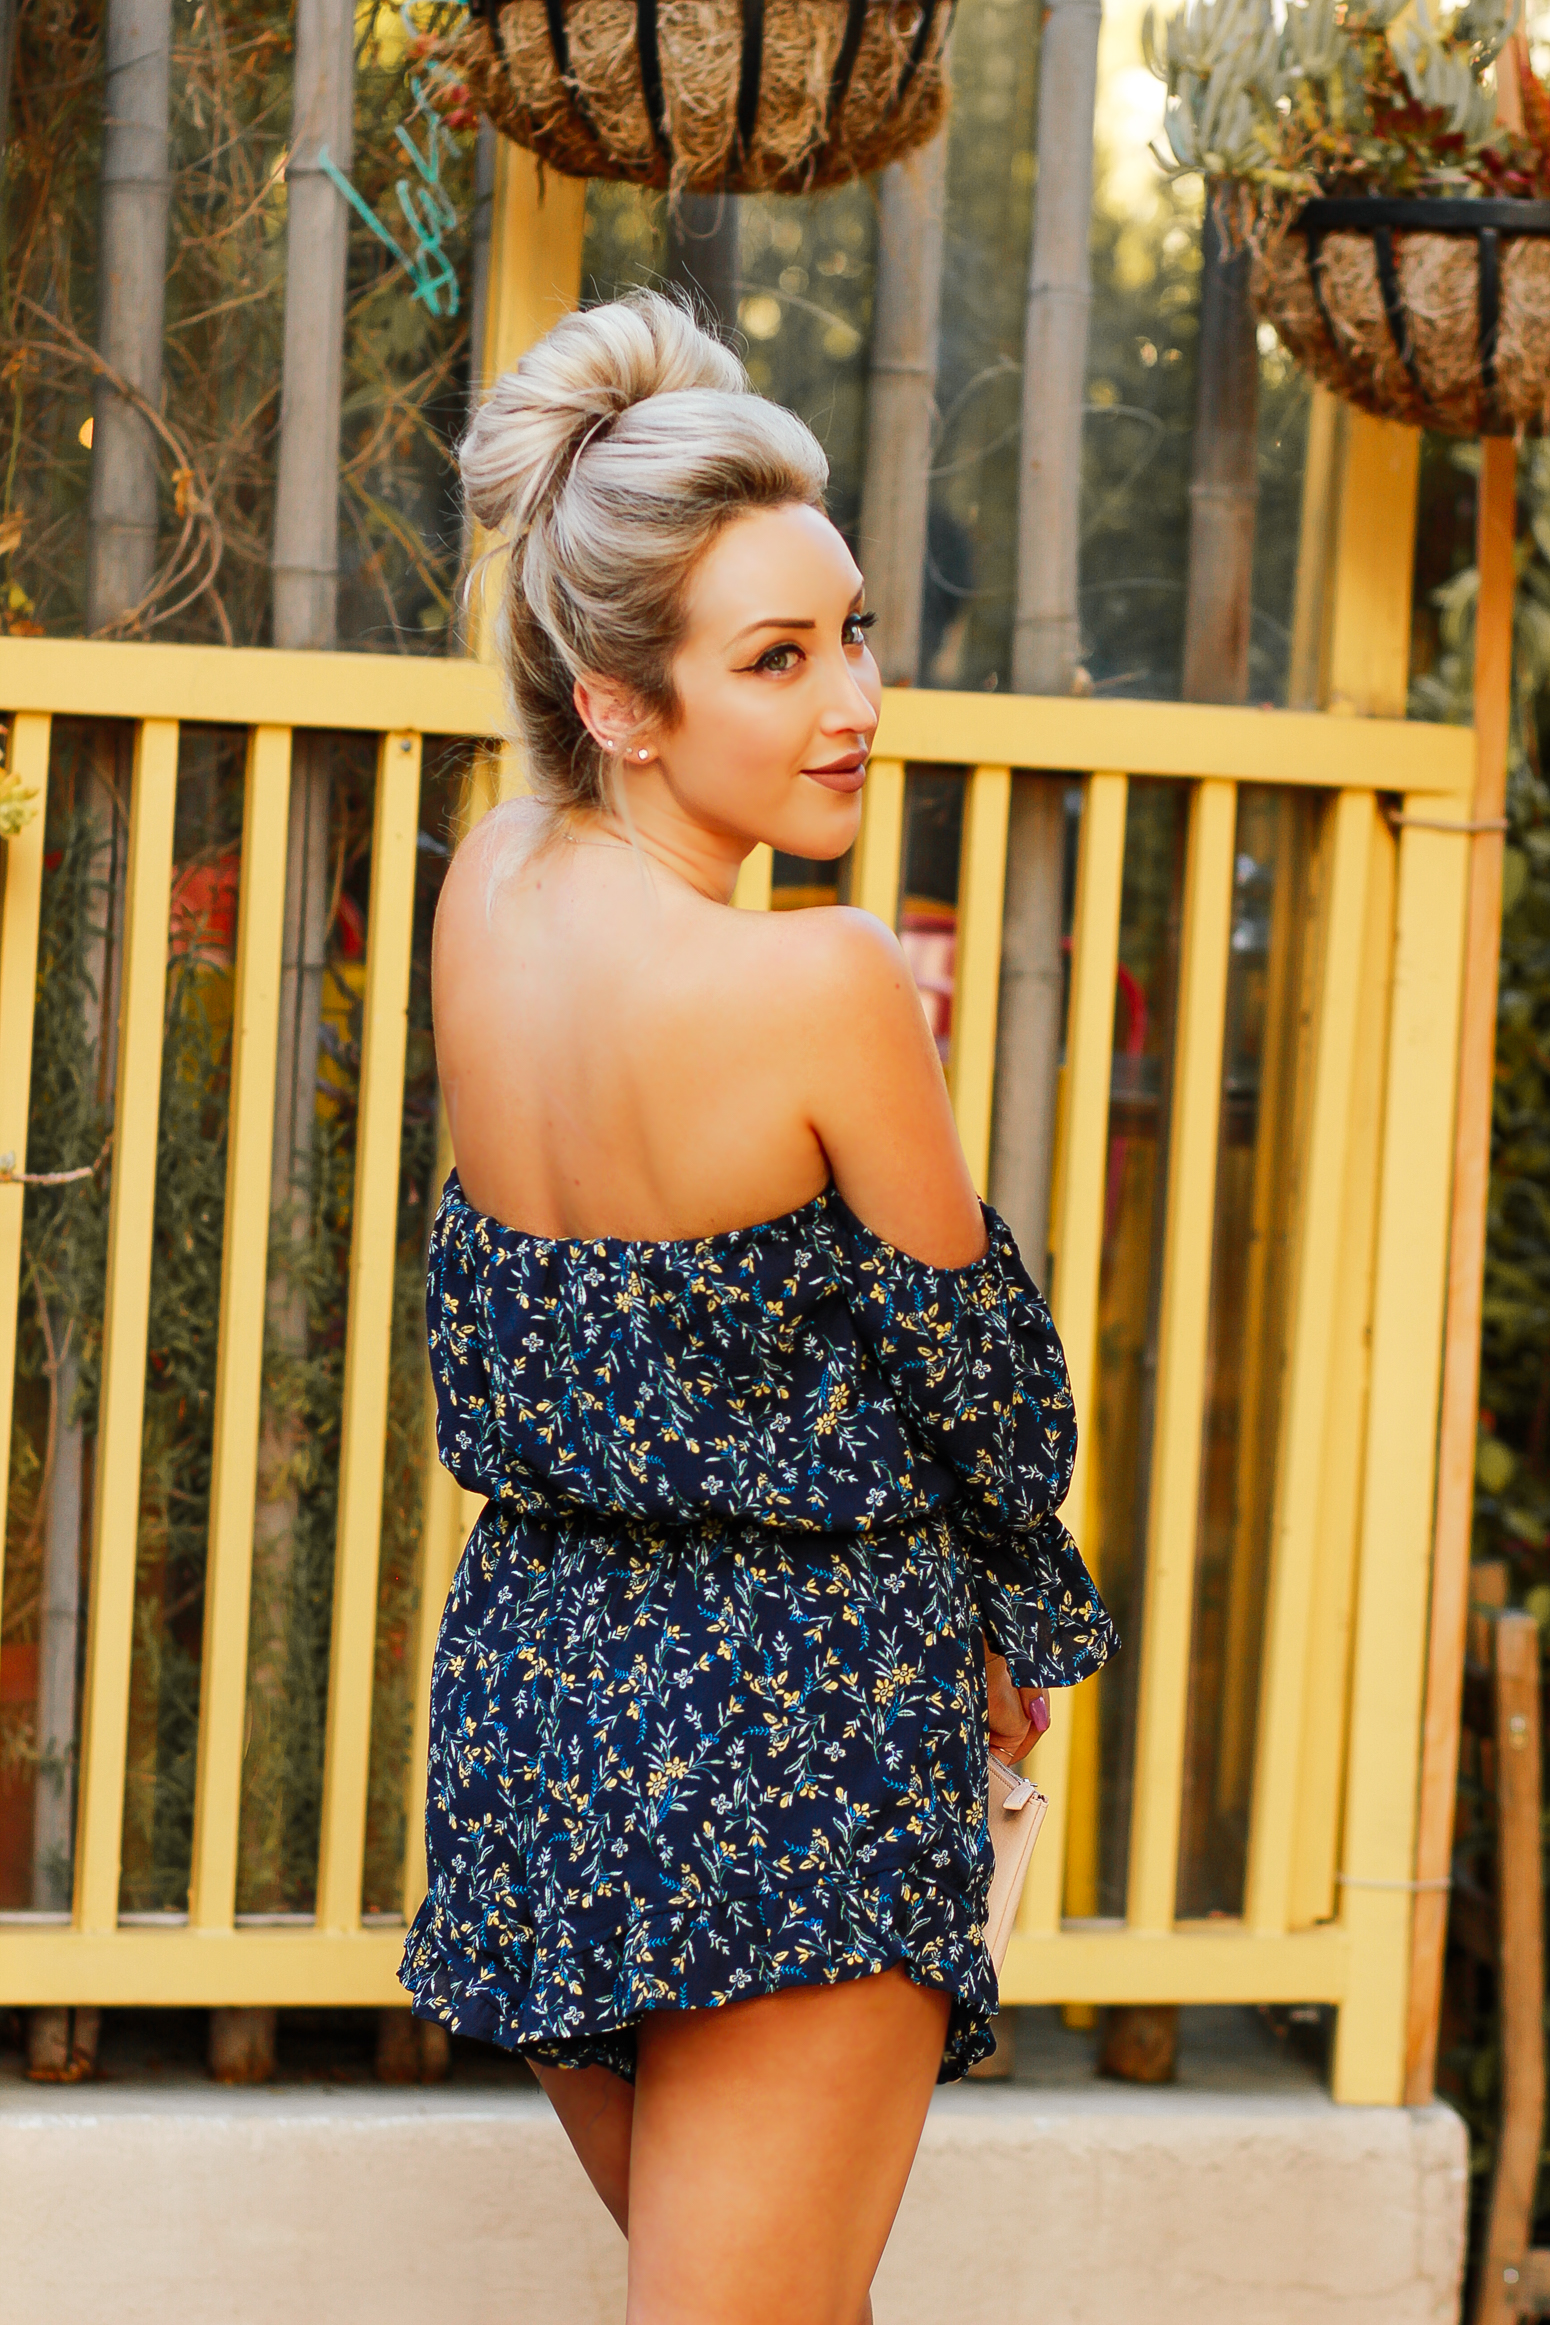 Blondie in the City | Navy Blue, Yellow Floral Romper | Summer Fashion | Cute Summer Outfit